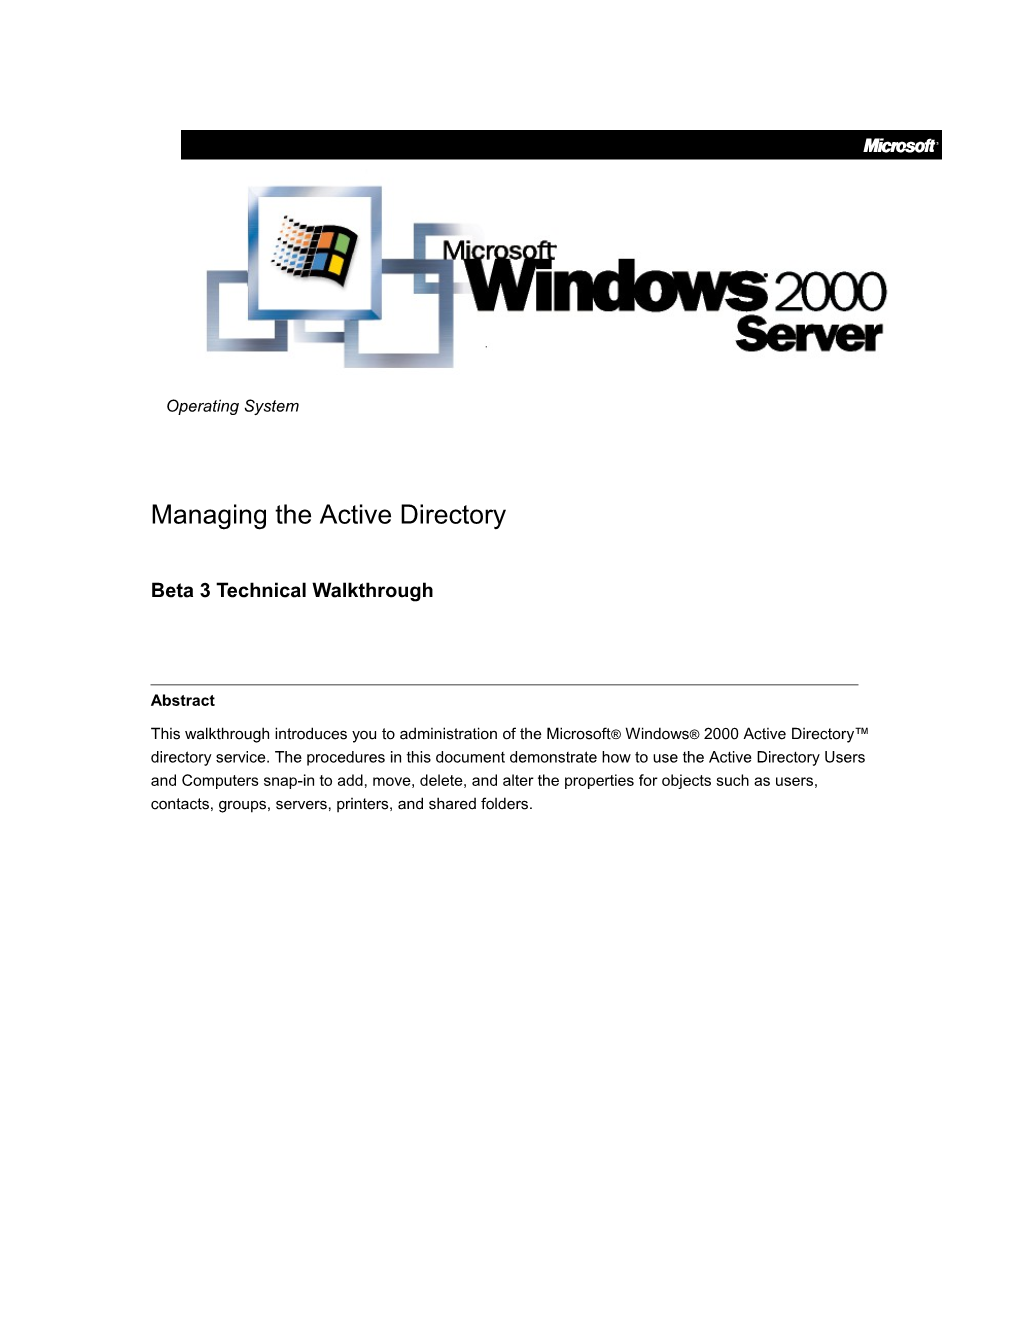 Managing the Active Directory